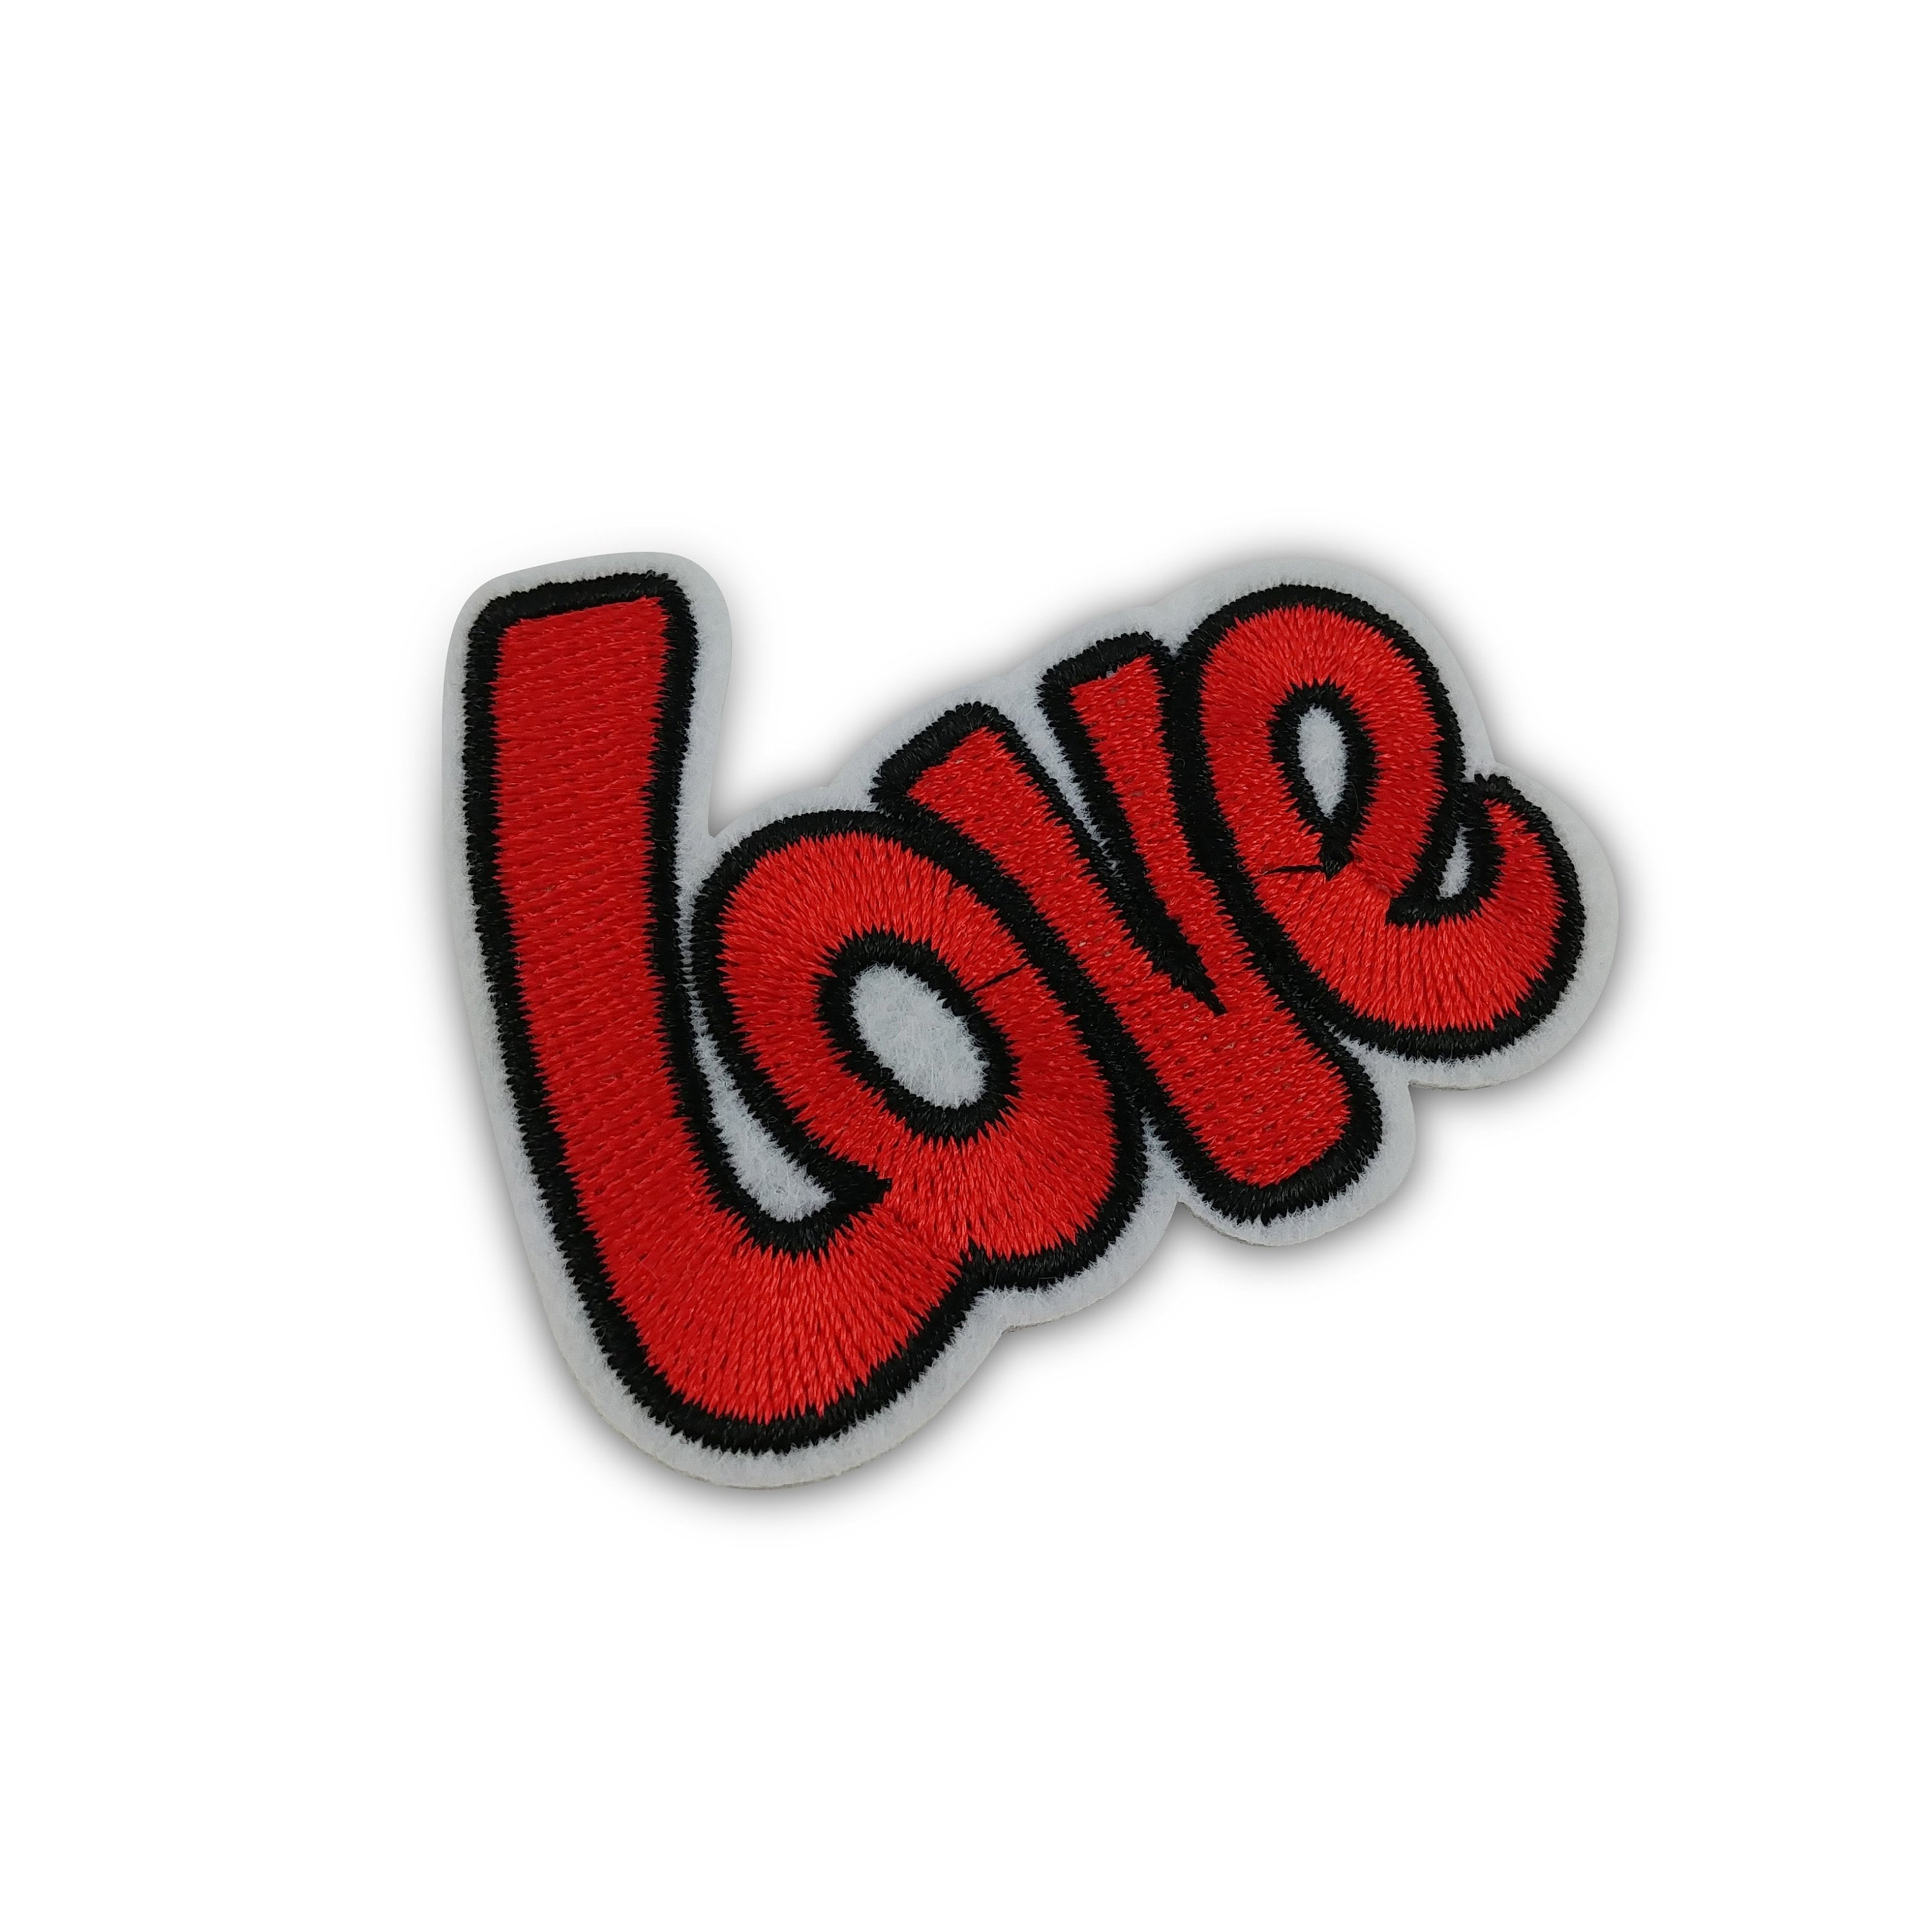 LOVE iron on patches, embroidered patch, sew on patch